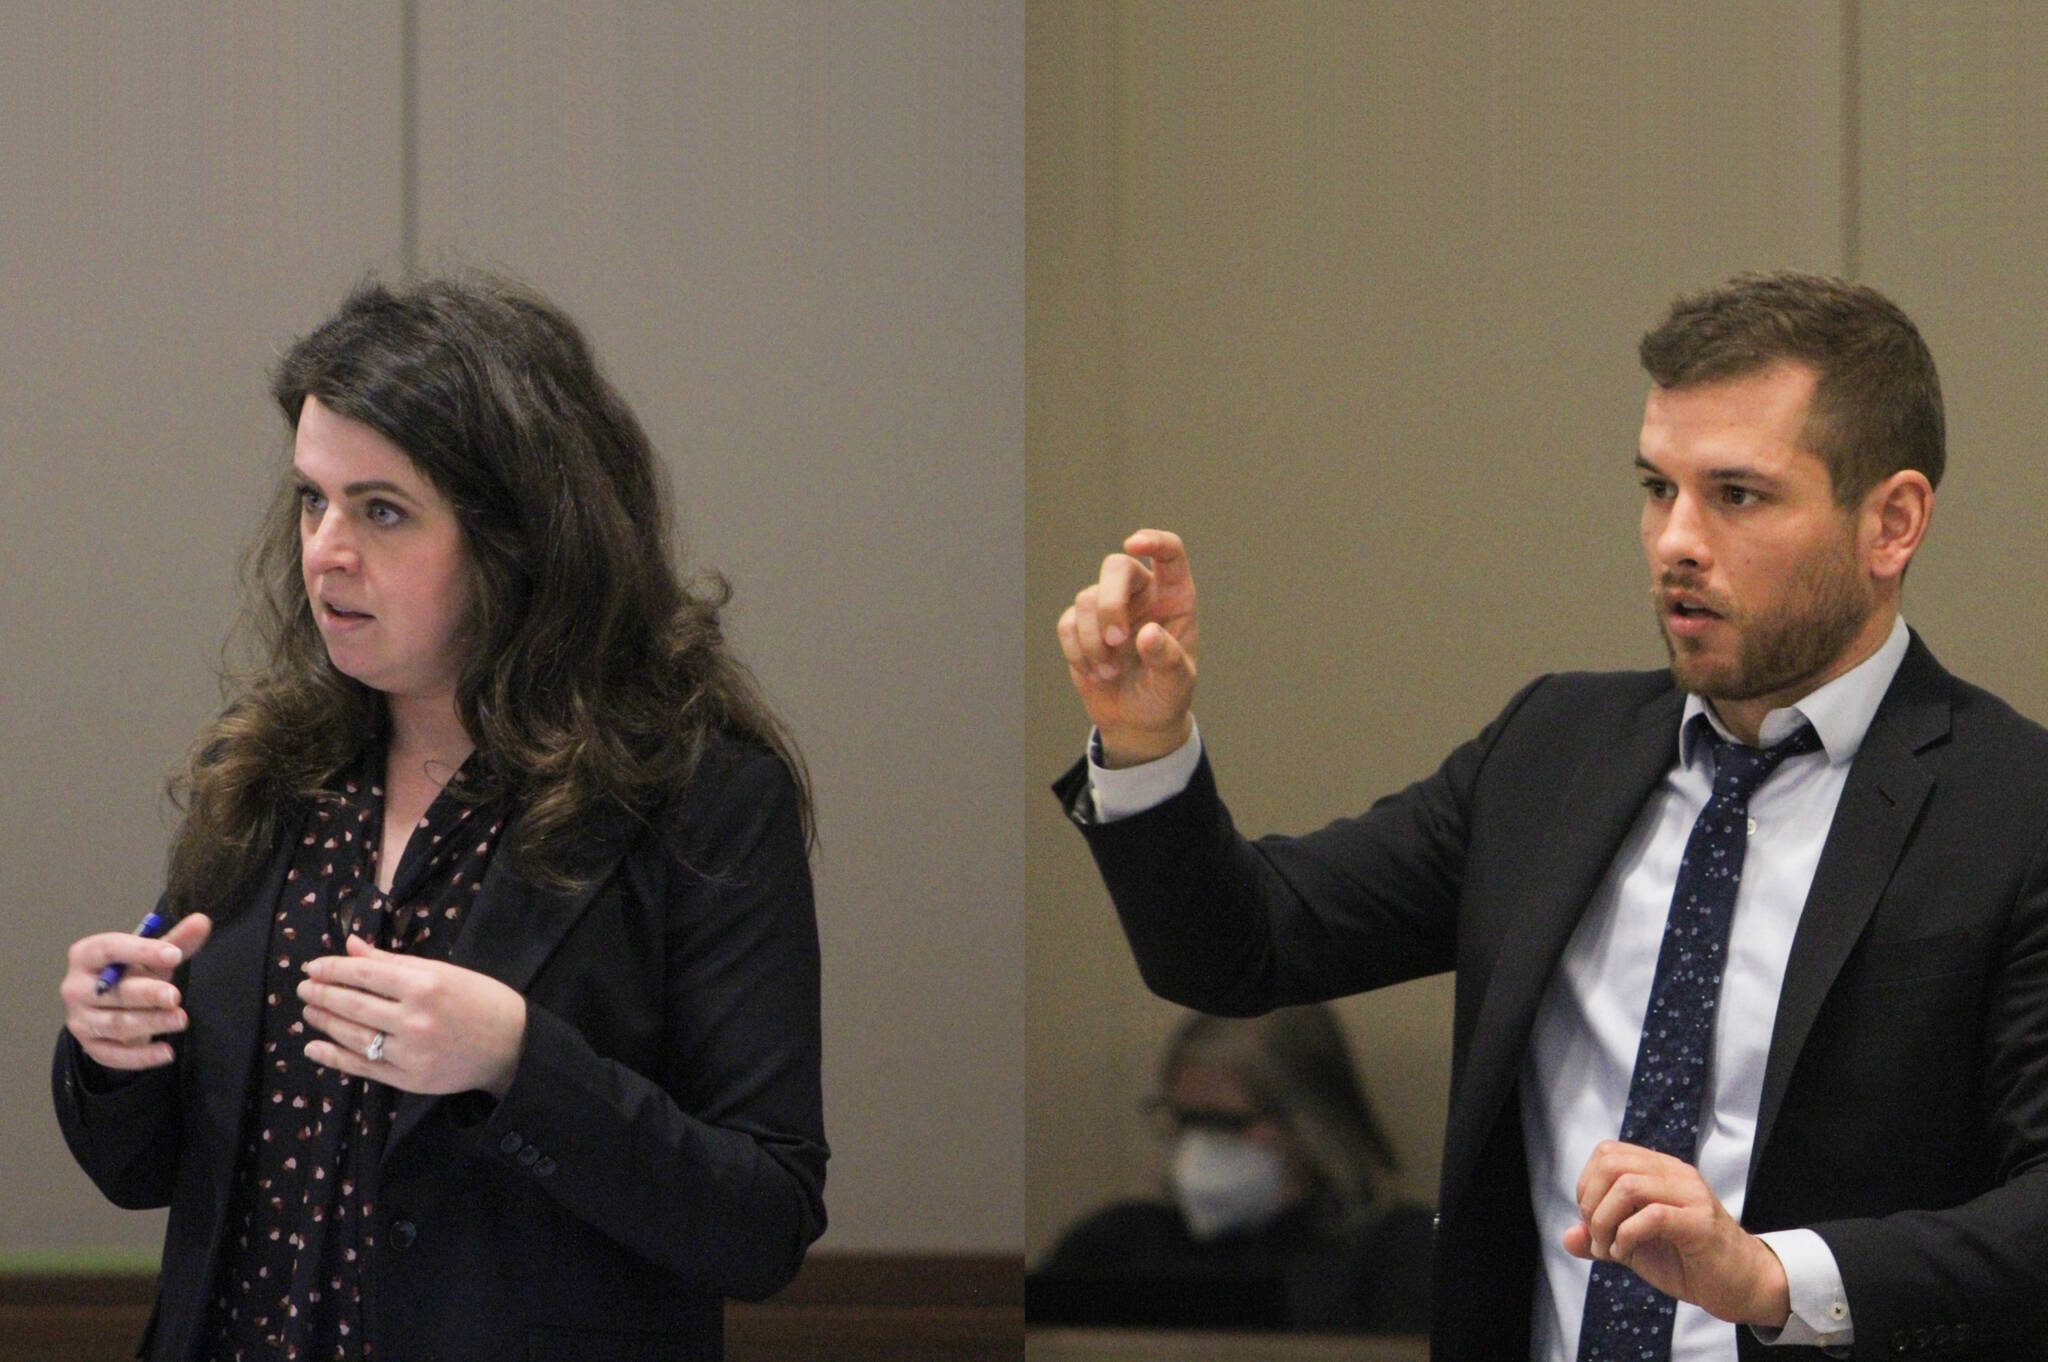 In this composited picture, a prosecuting attorney (left) and Nicholas’ defense attorney (right) argue over pre-trial motions during the first day scheduled in the trial against Patrick Nicholas, accused of the 1991 murder of Sarah Yarborough. Judge Josephine Wiggs asked attending news media reporters not to photograph Nicholas in court at this time, as jury selection has not yet begun. Alex Bruell / The Mirror